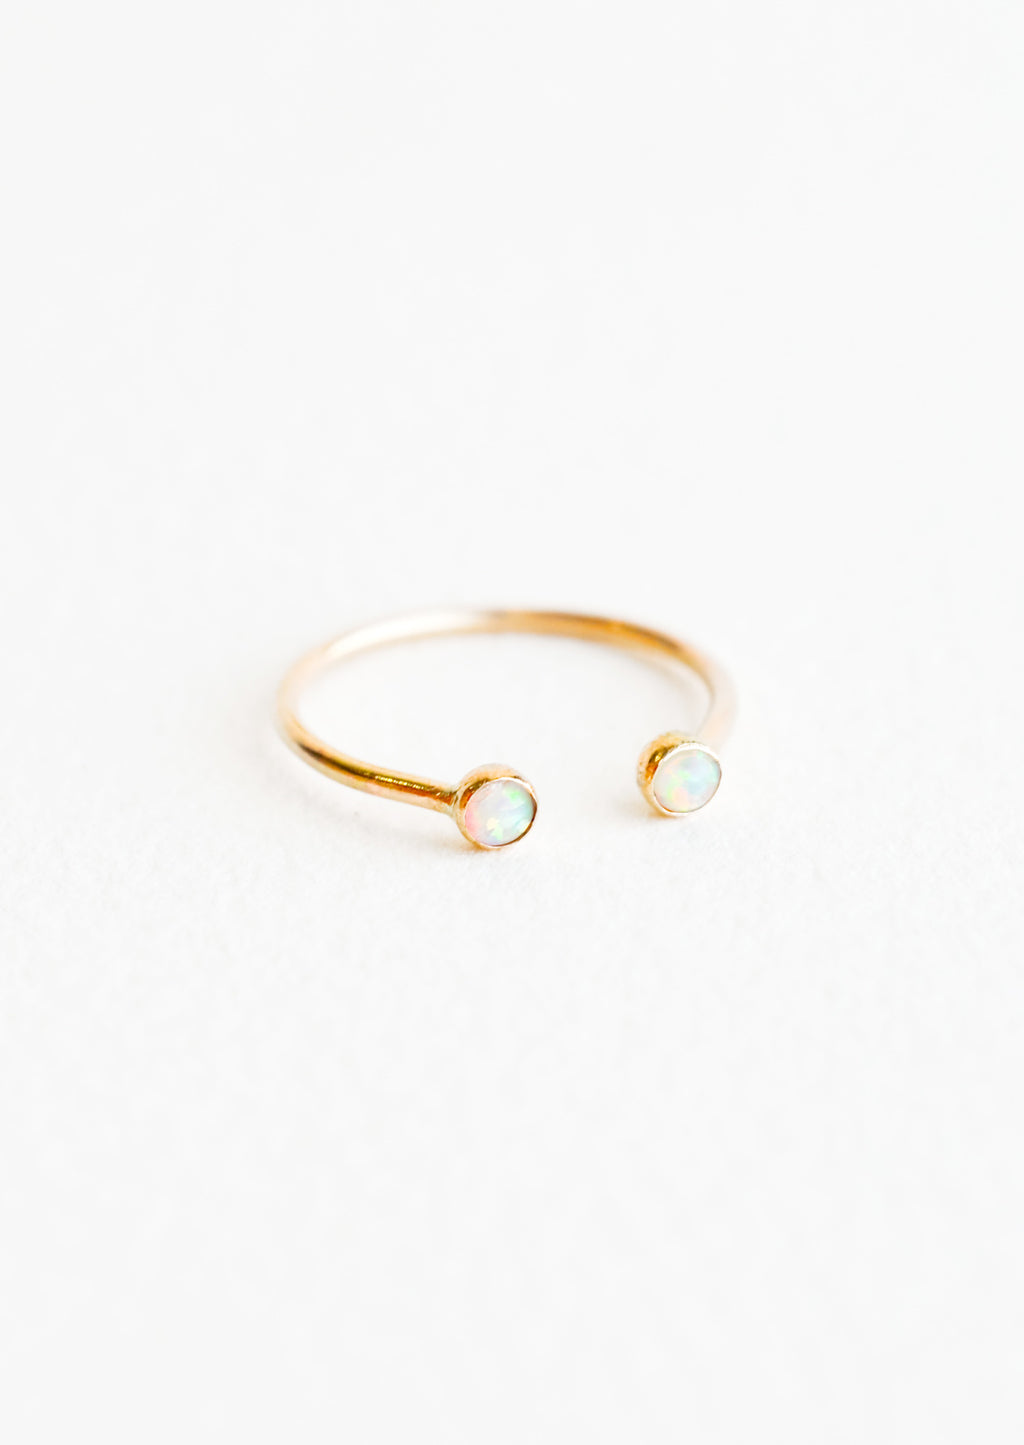 Opal / Size 6: Yellow gold adjustable ring with opening at front and an opal stone on each side of the opening.